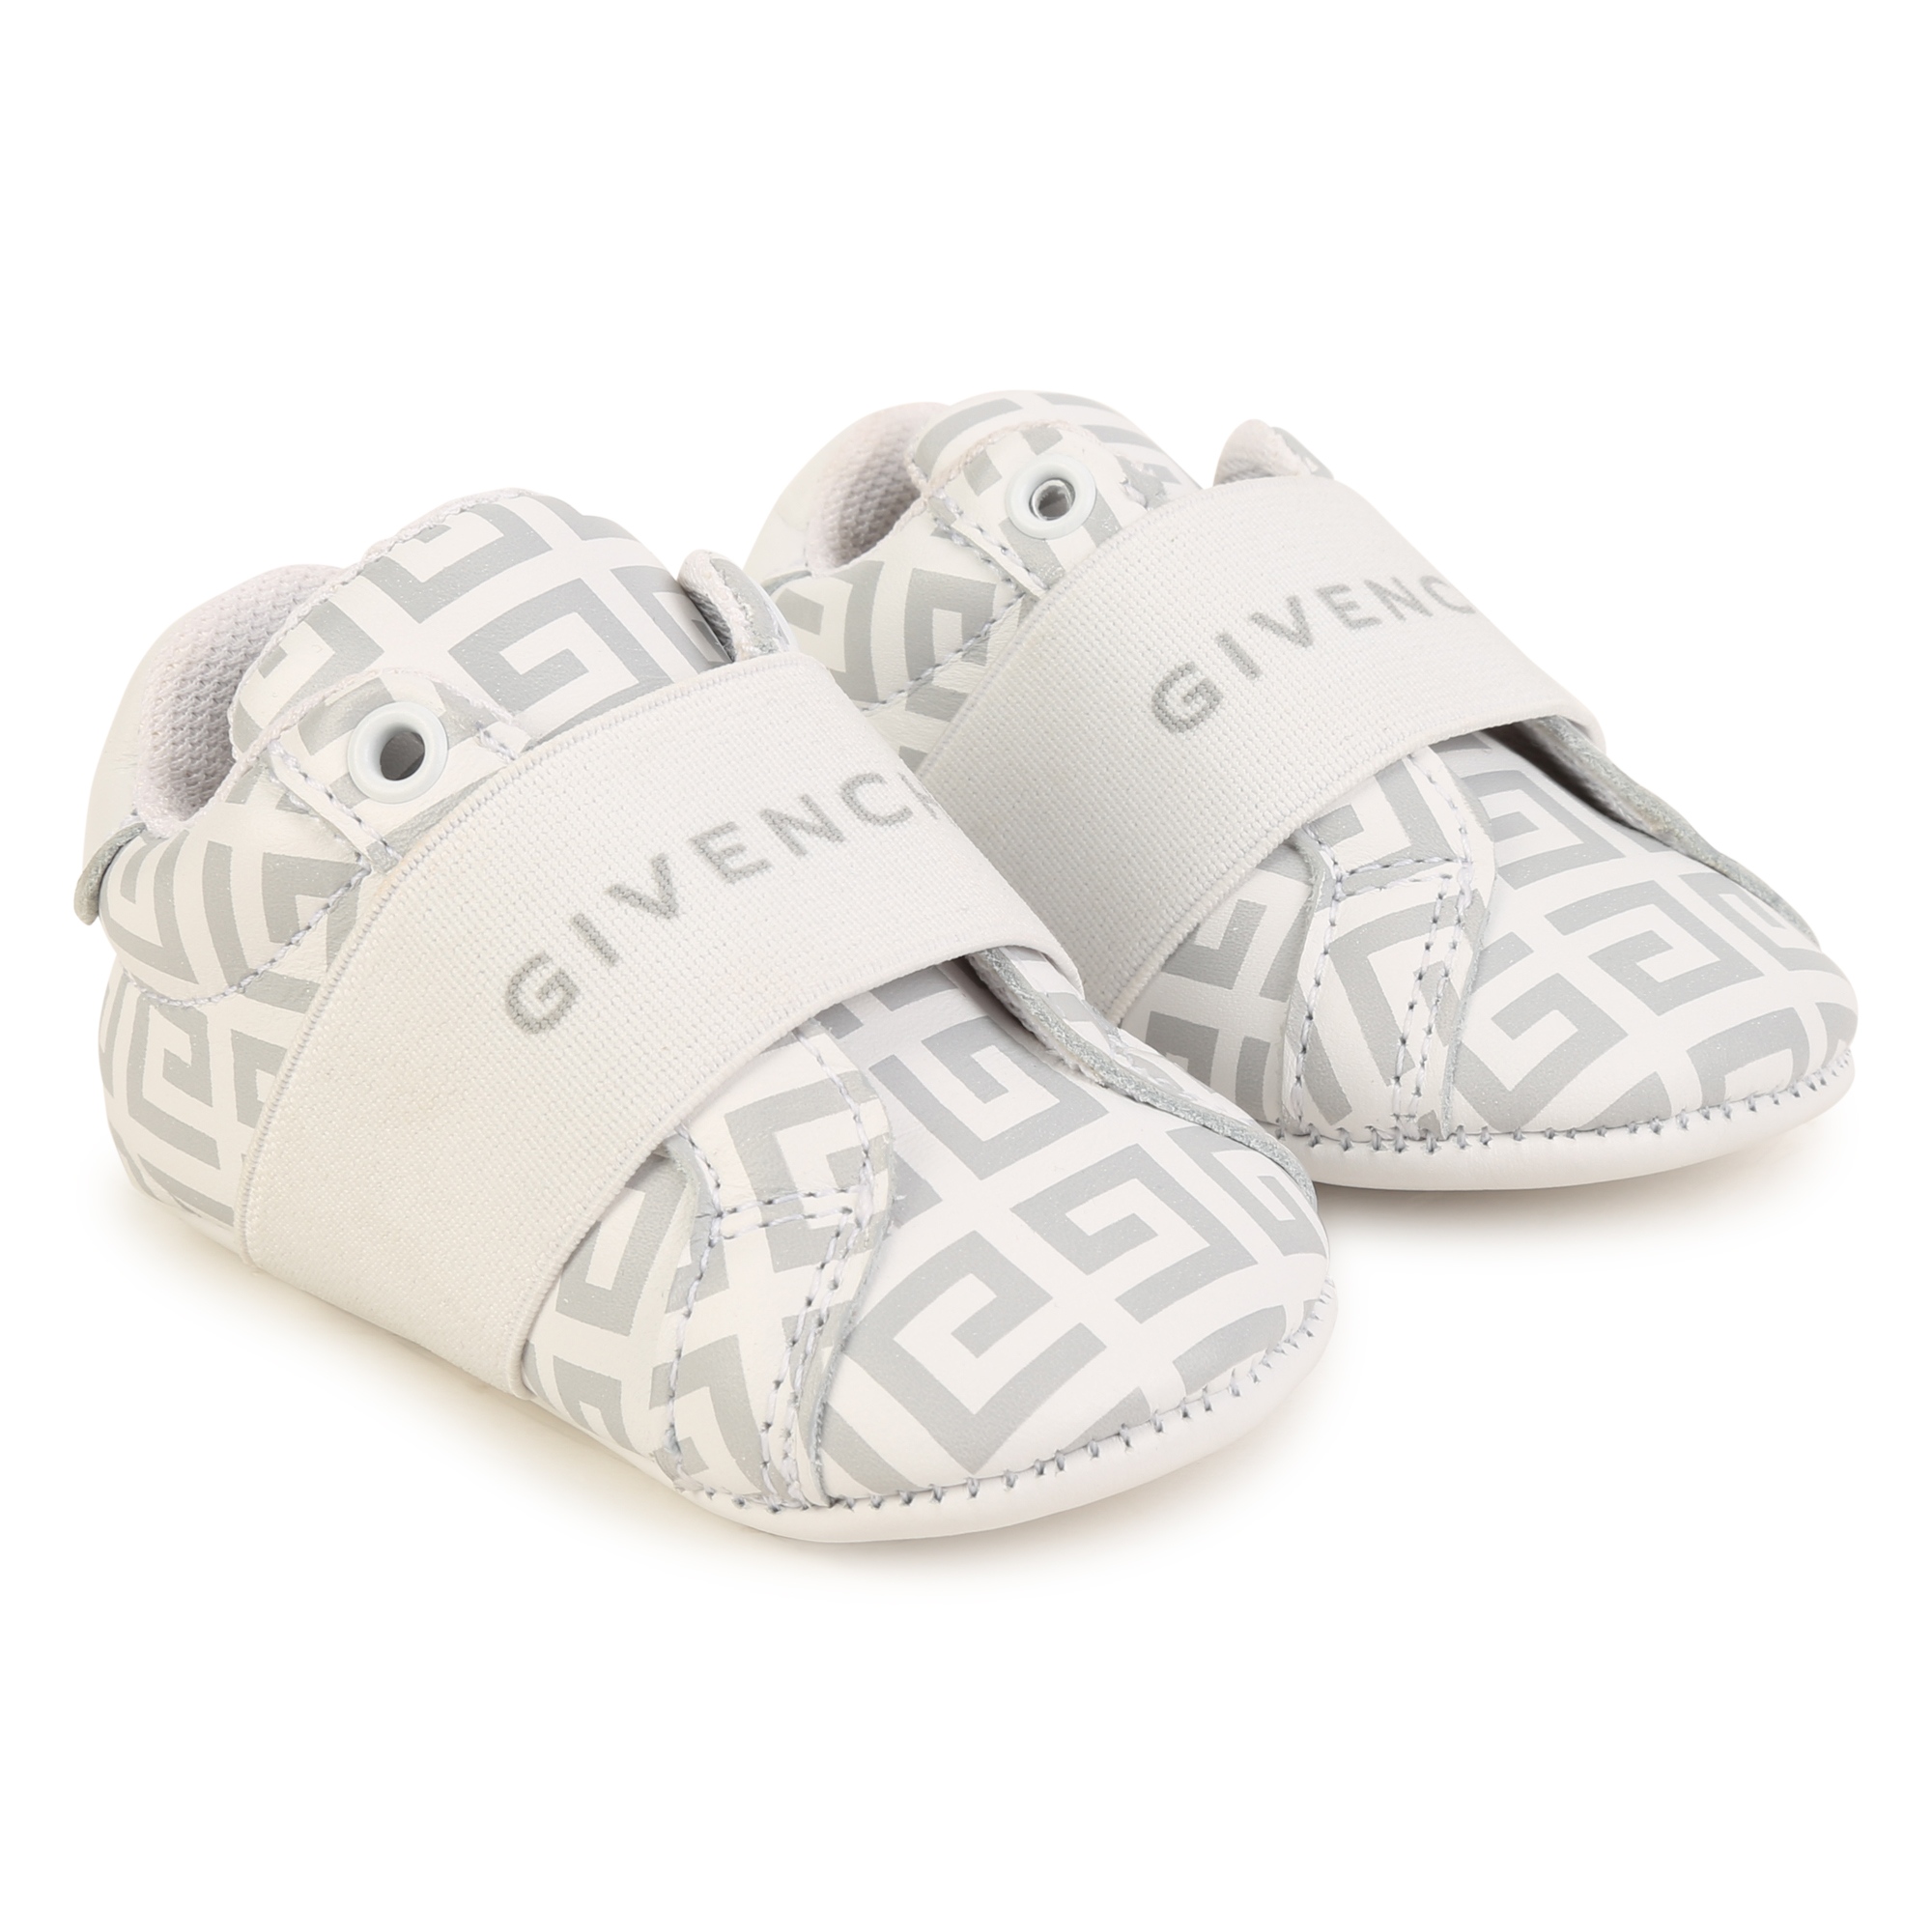 givenchy chaussons en cuir unisexe 19 gris